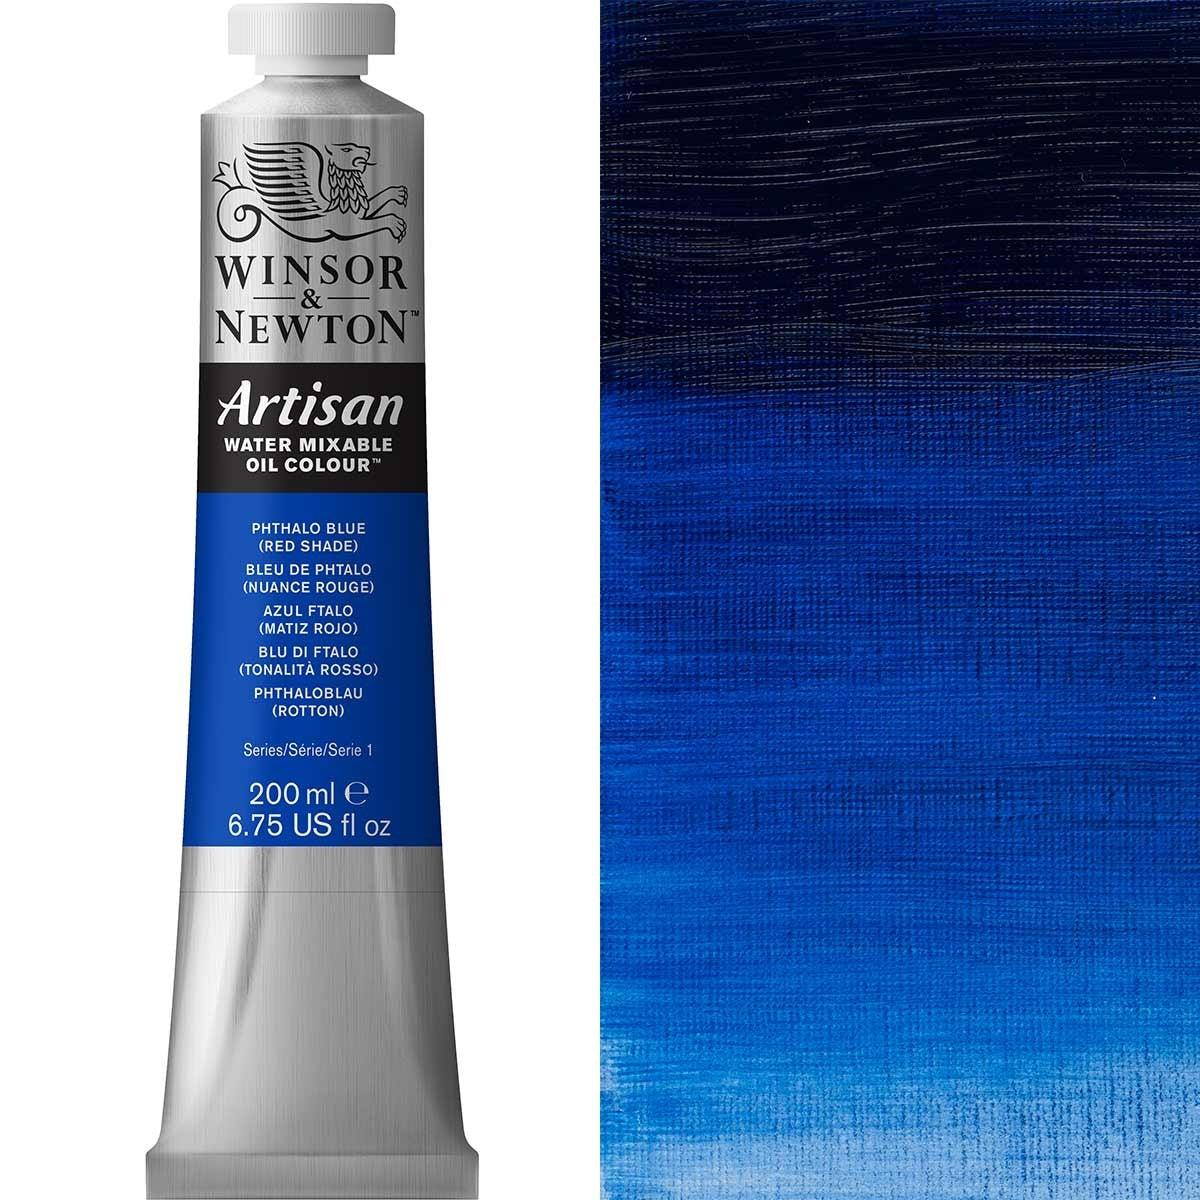 Winsor et Newton - Couleur d'huile artisanale Watermixable - 200 ml - Phthalo Blue Red Shade